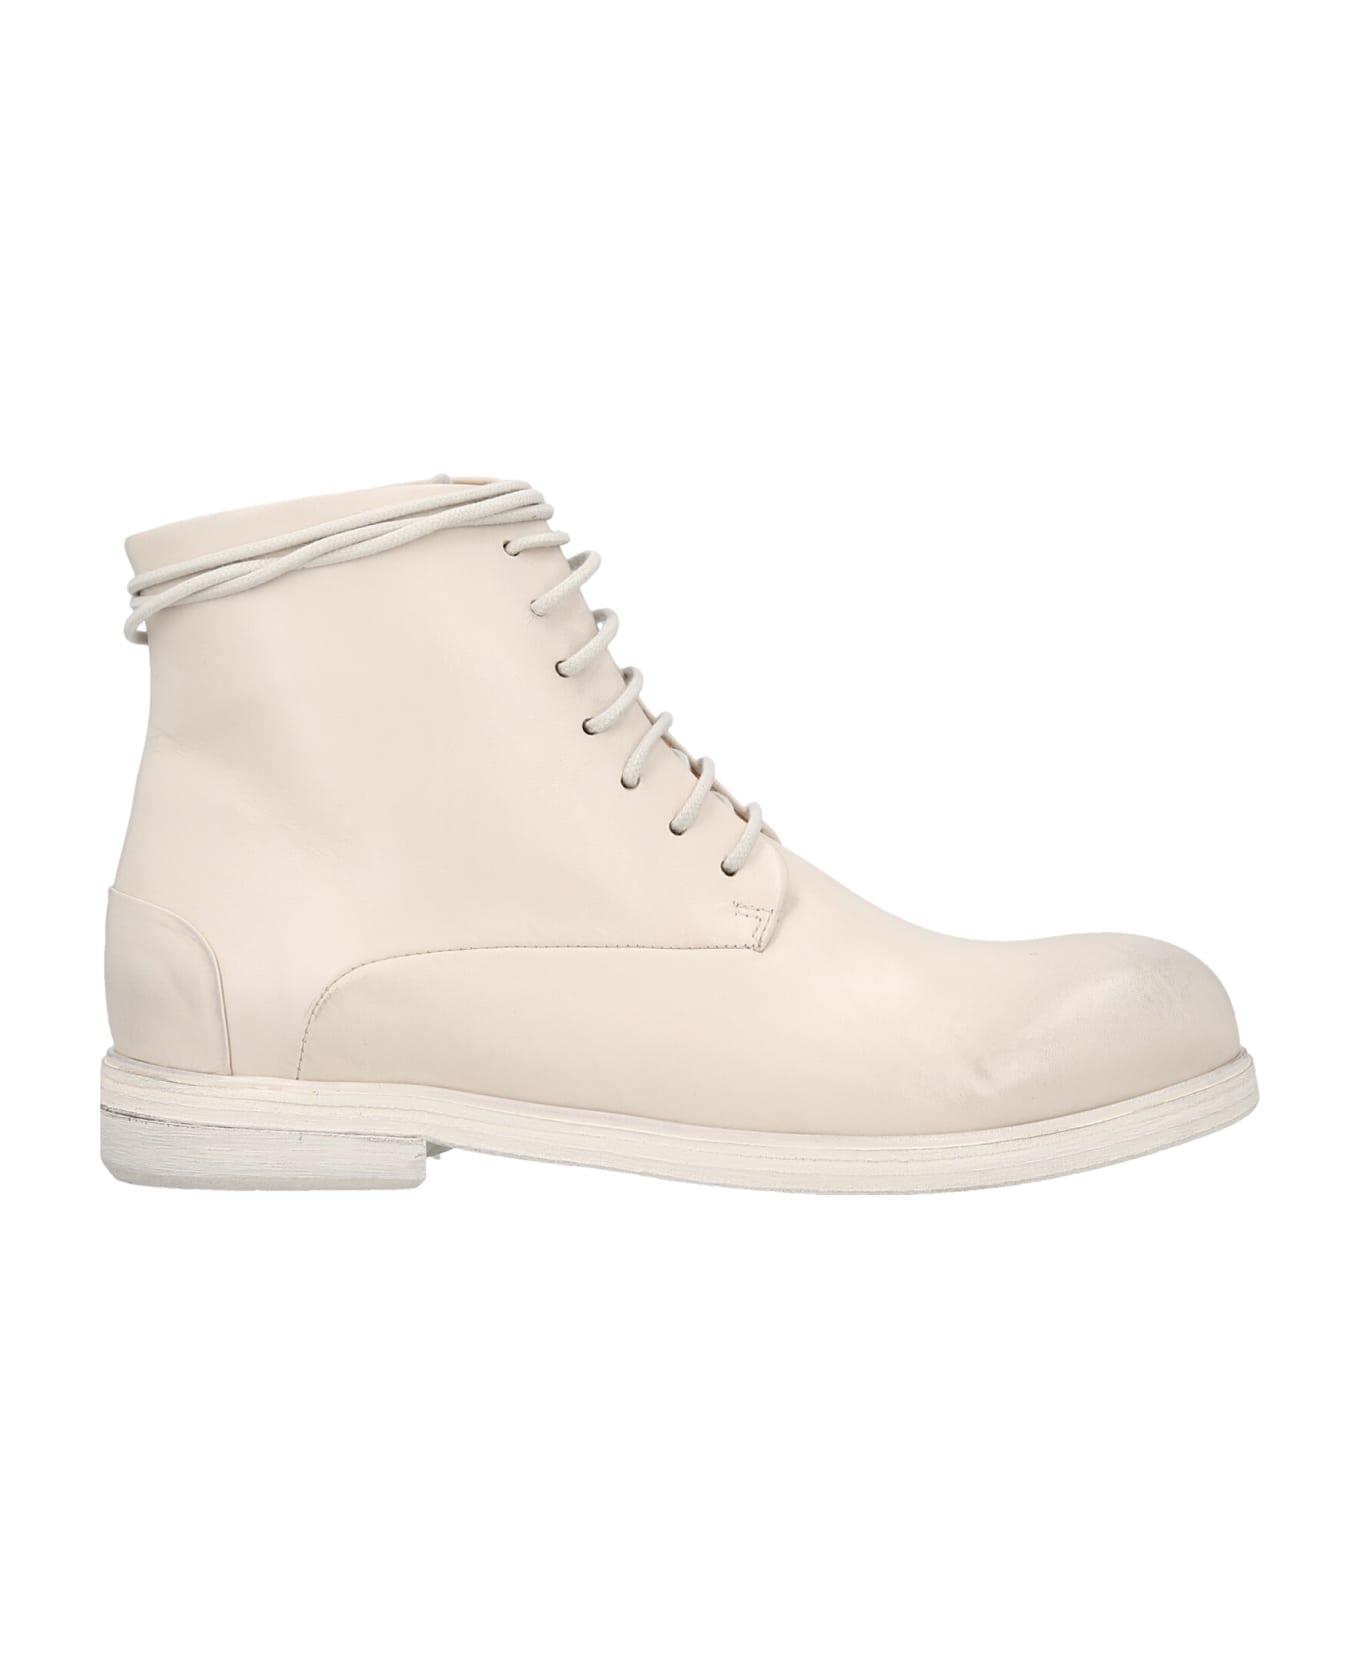 Marsell 'zucca Media' Ankle Boots - White